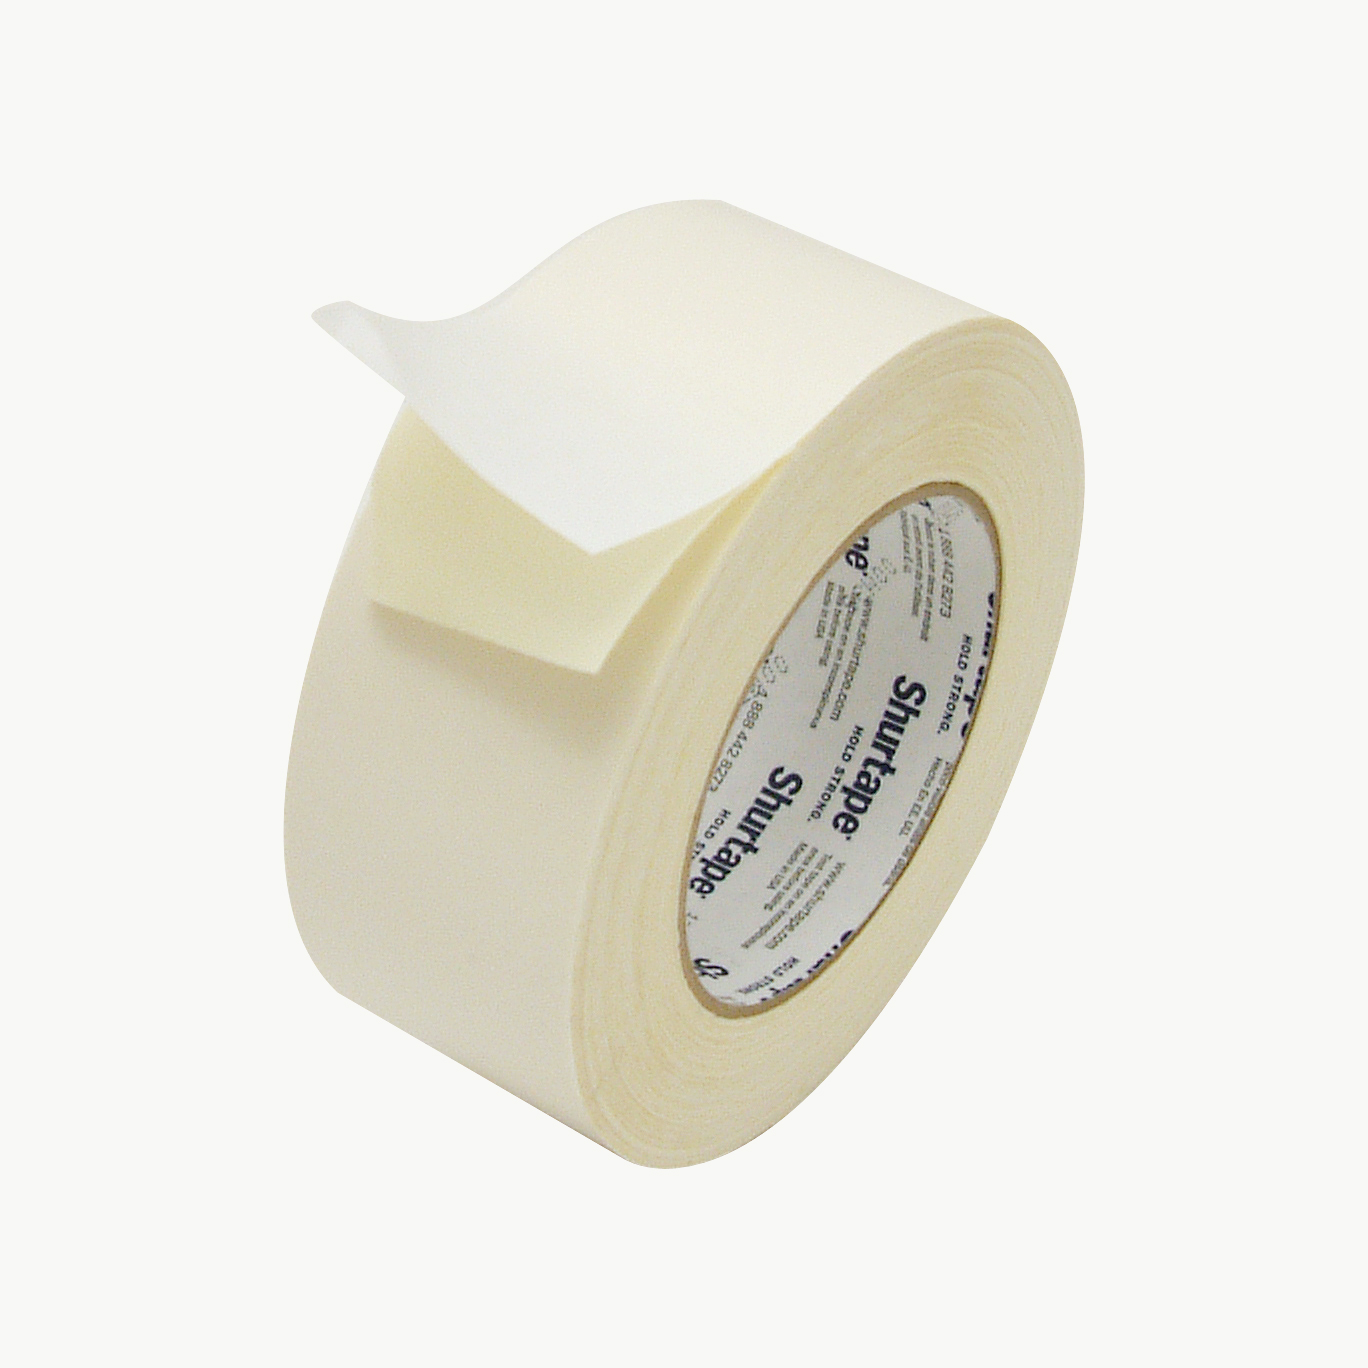 Shurtape Double-Sided Flat Paper Tape [Rubber Adhesive] (DF-65)